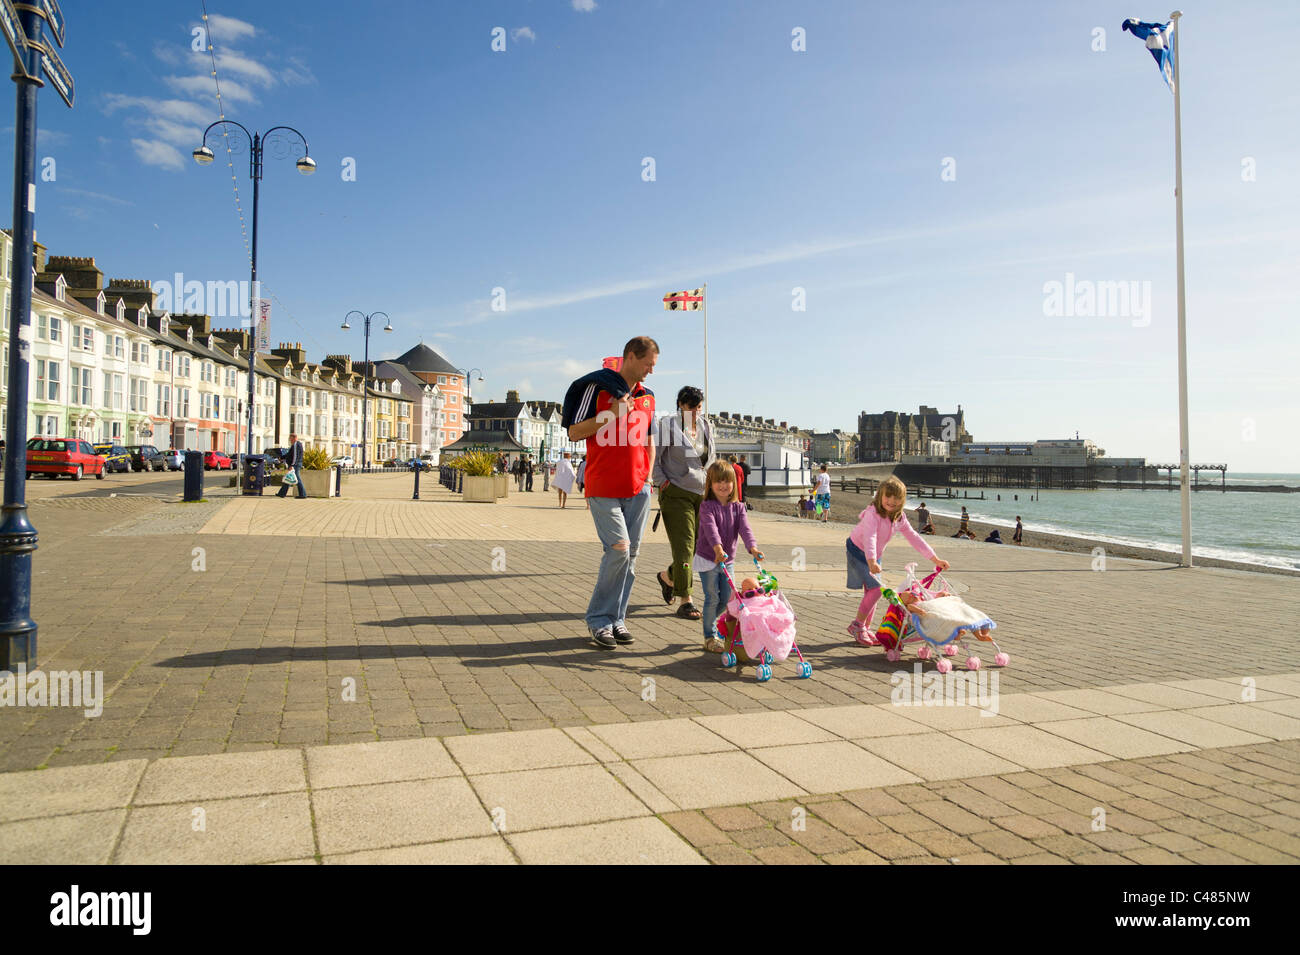 Summer afternoon, a family walking on Aberystwyth promenade, Wales UK Stock Photo